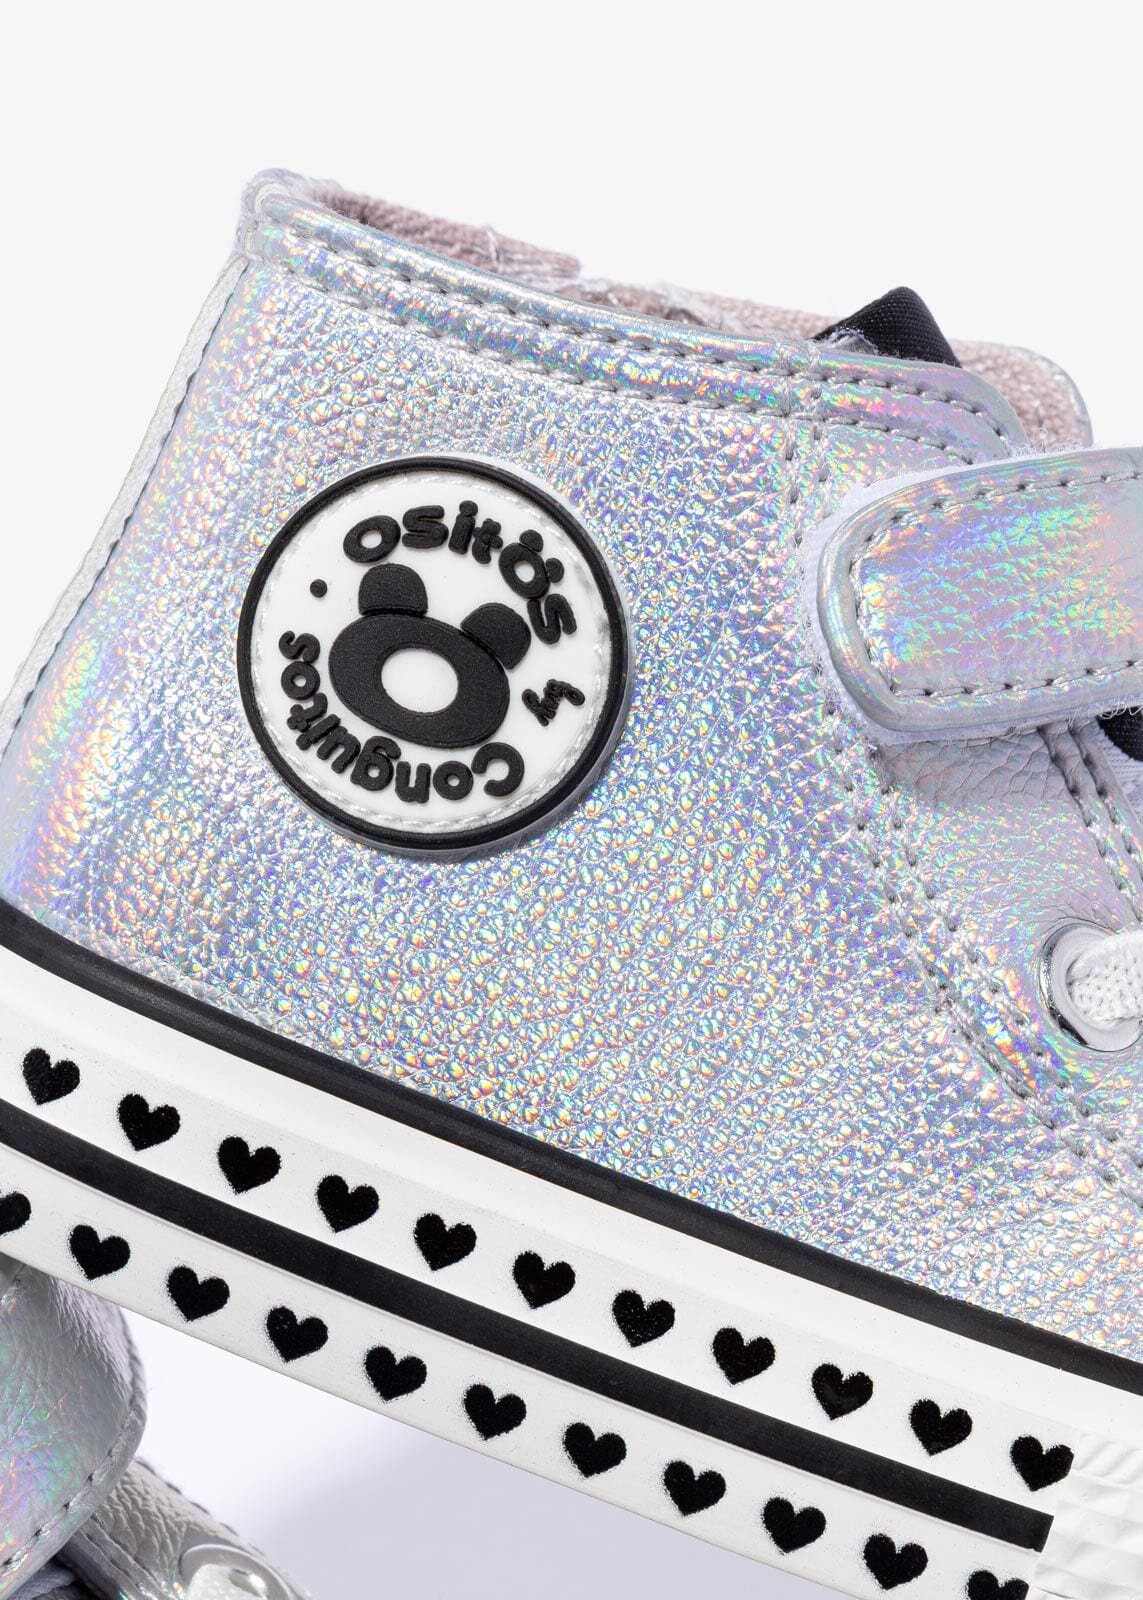 OSITO Shoes Baby's Iridescent Silver Hi-Top Sneakers